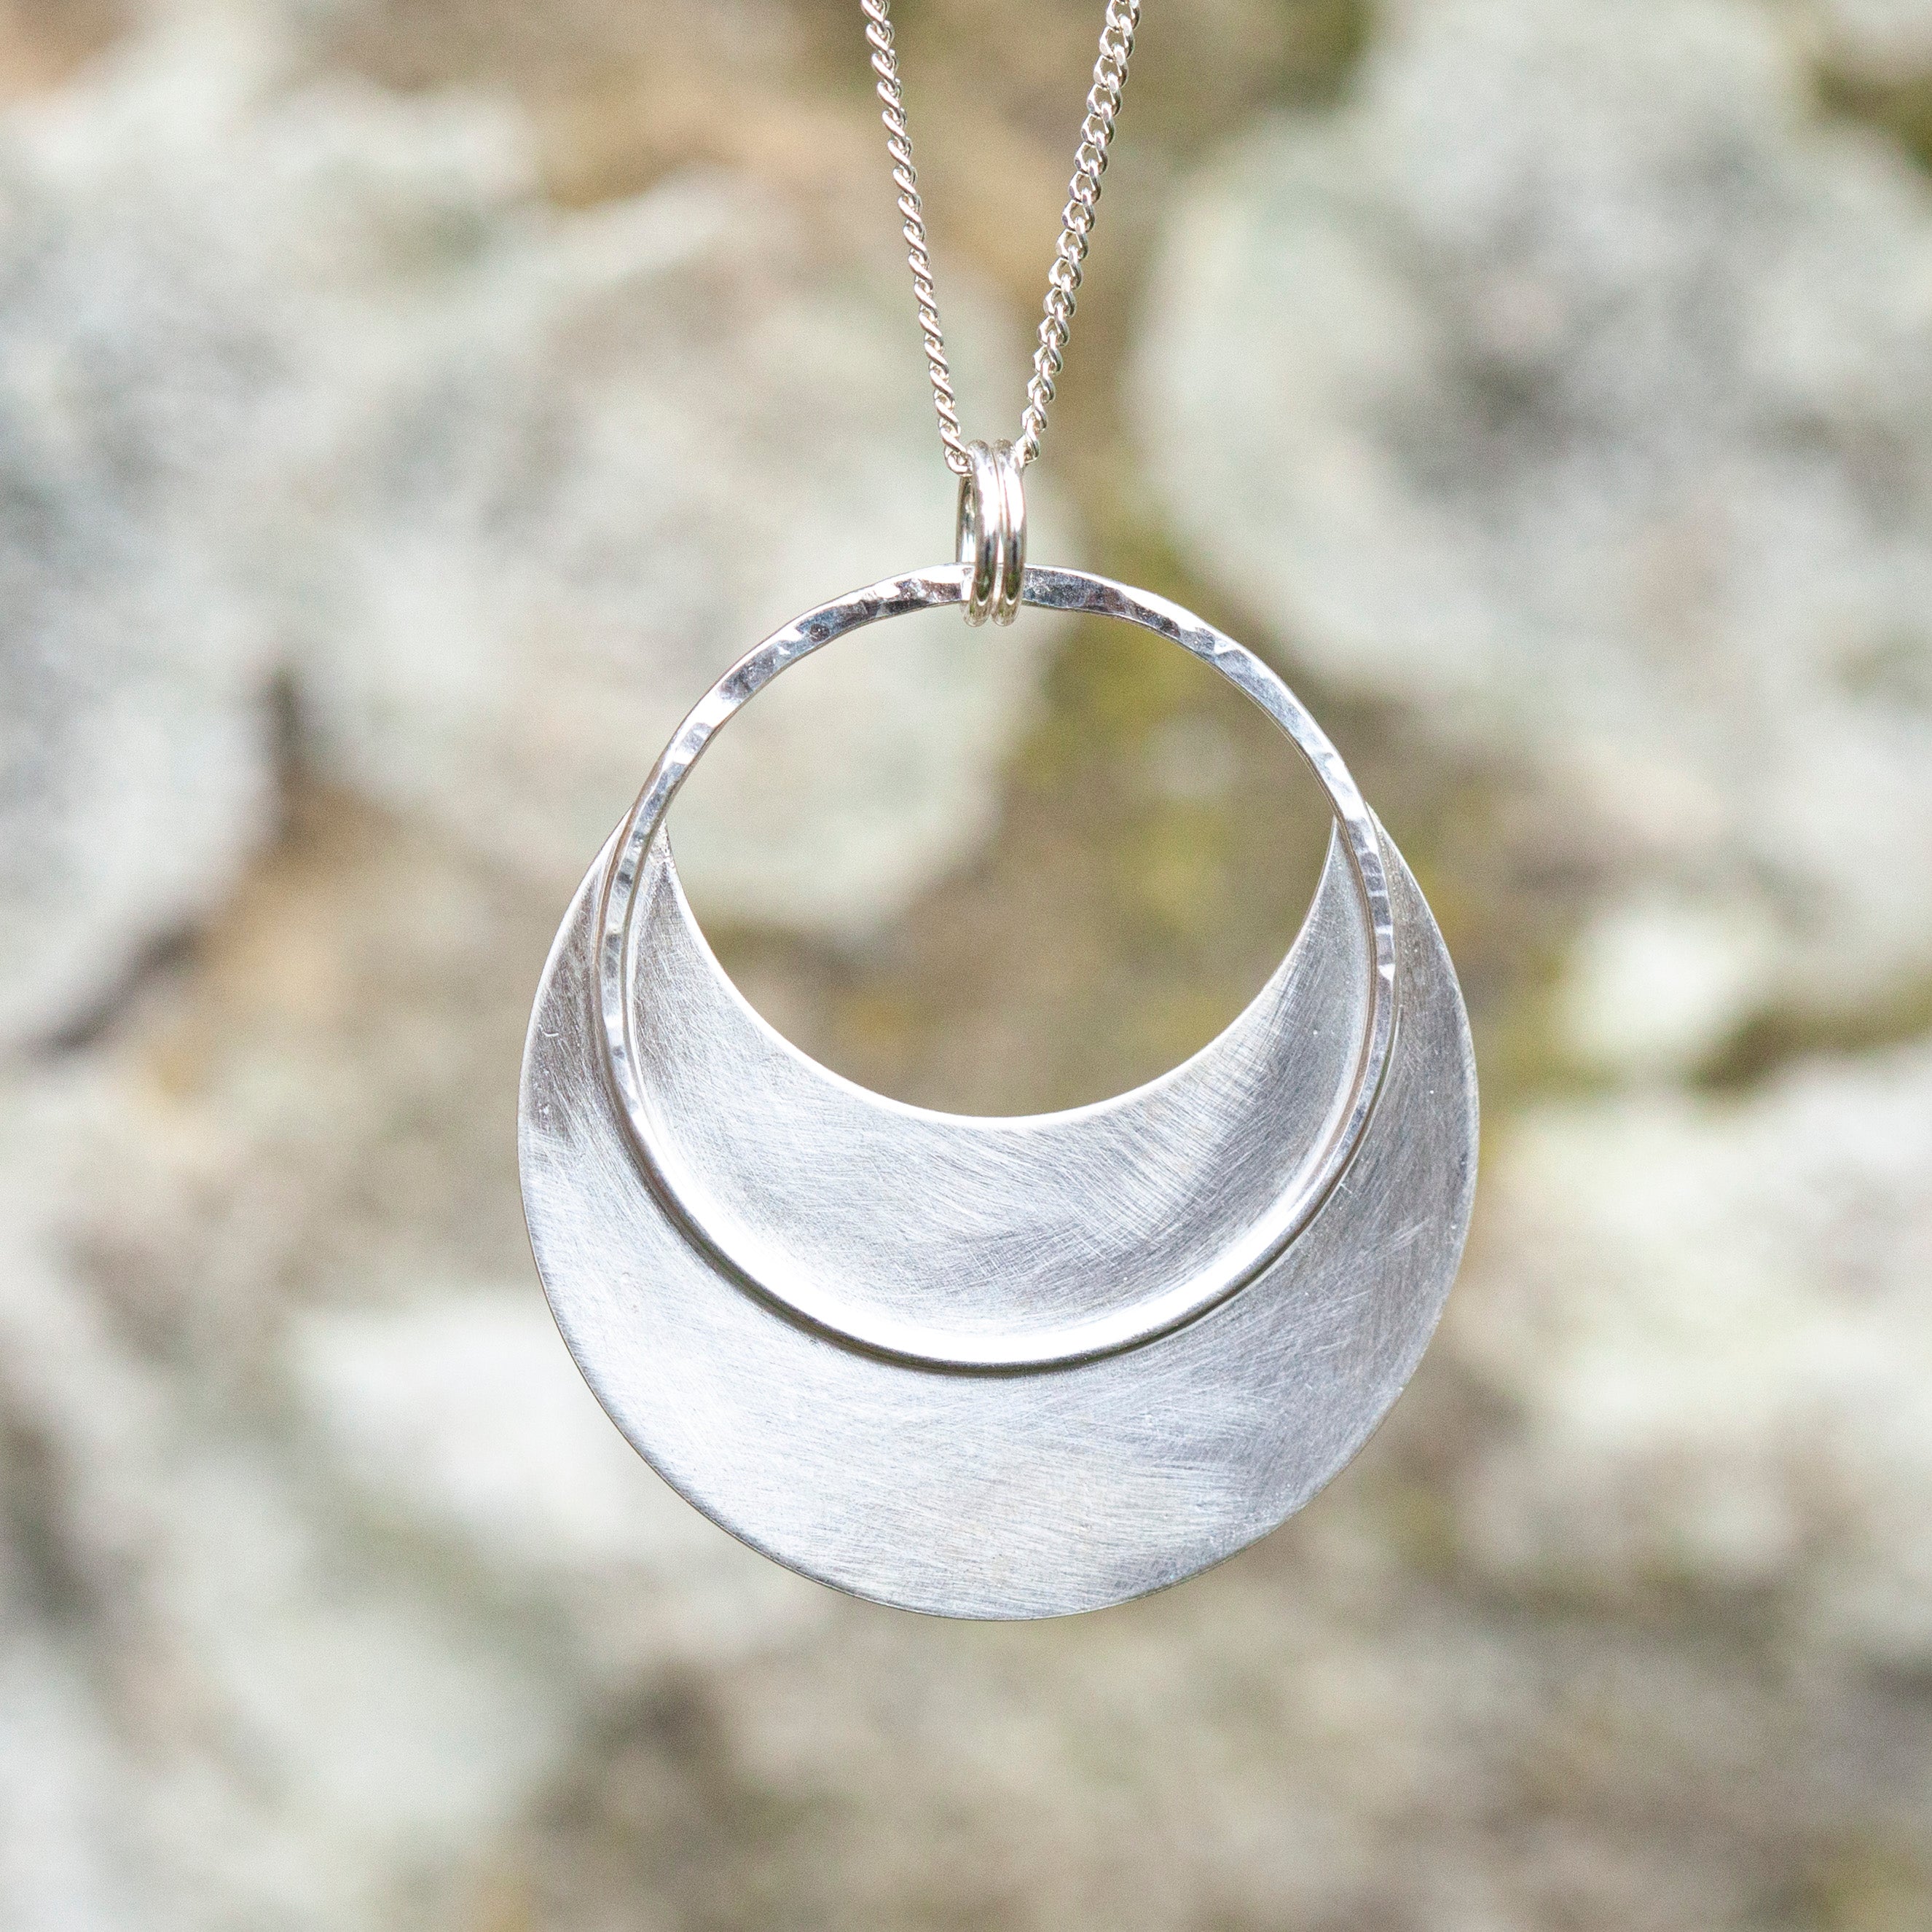 OOAK • Crescent moon pendant in silver #2  (ready to ship)